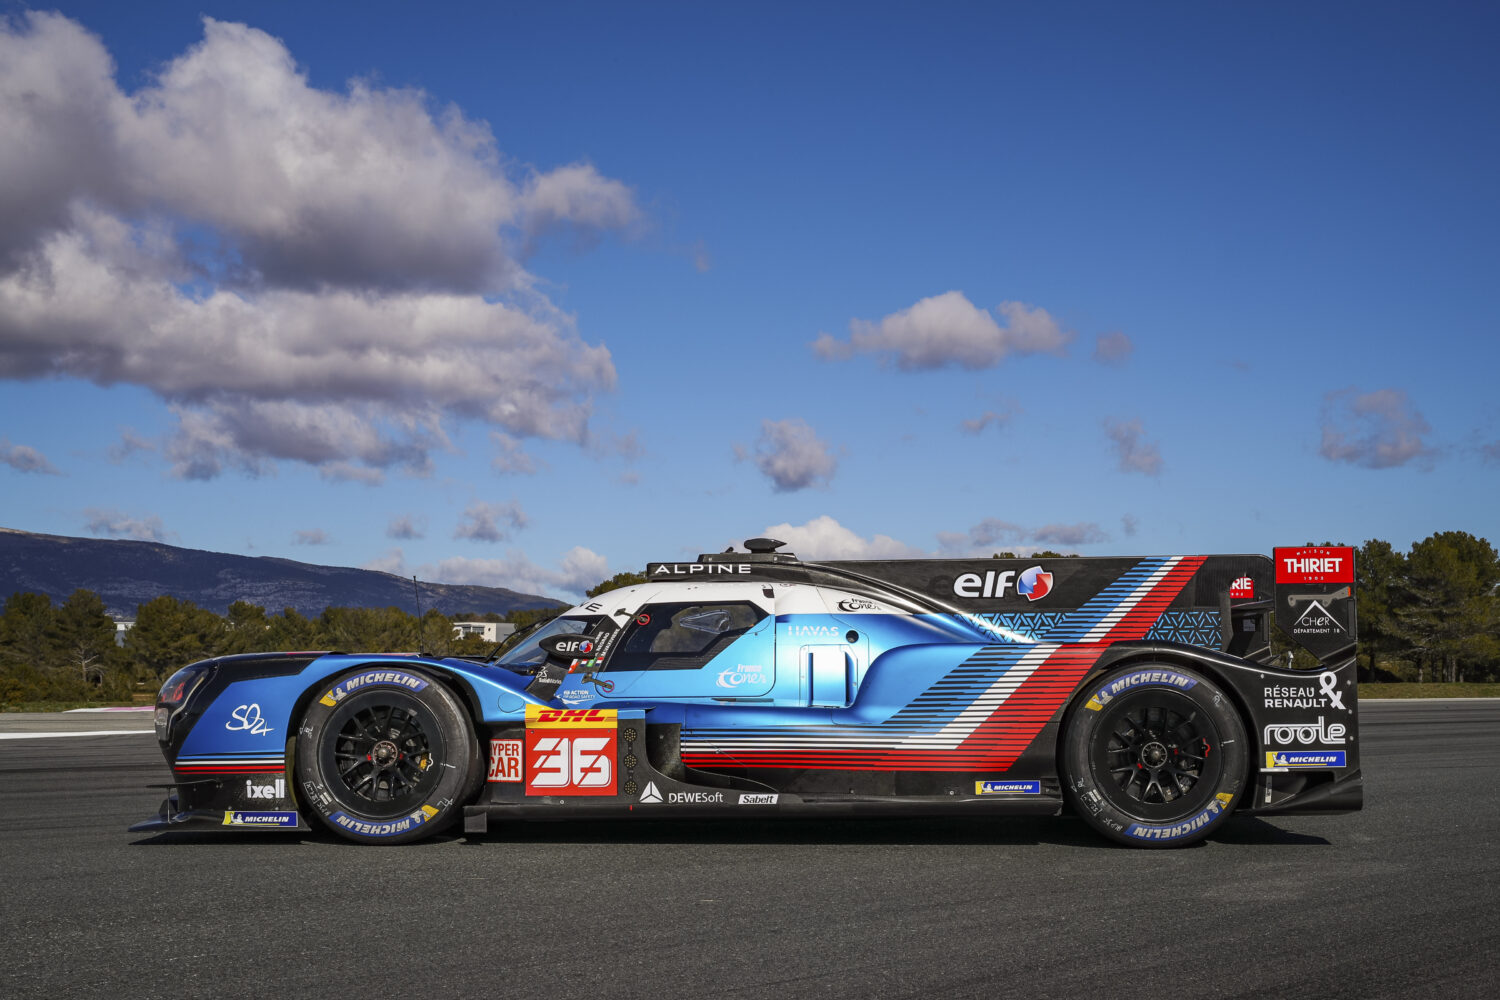 30-2022 - Alpine A480 - Tests Sessions on the Castellet circuit – Alpine A480 N°36 Alpine Elf (Lapierre - Negrao - Vaxiviere).jpeg